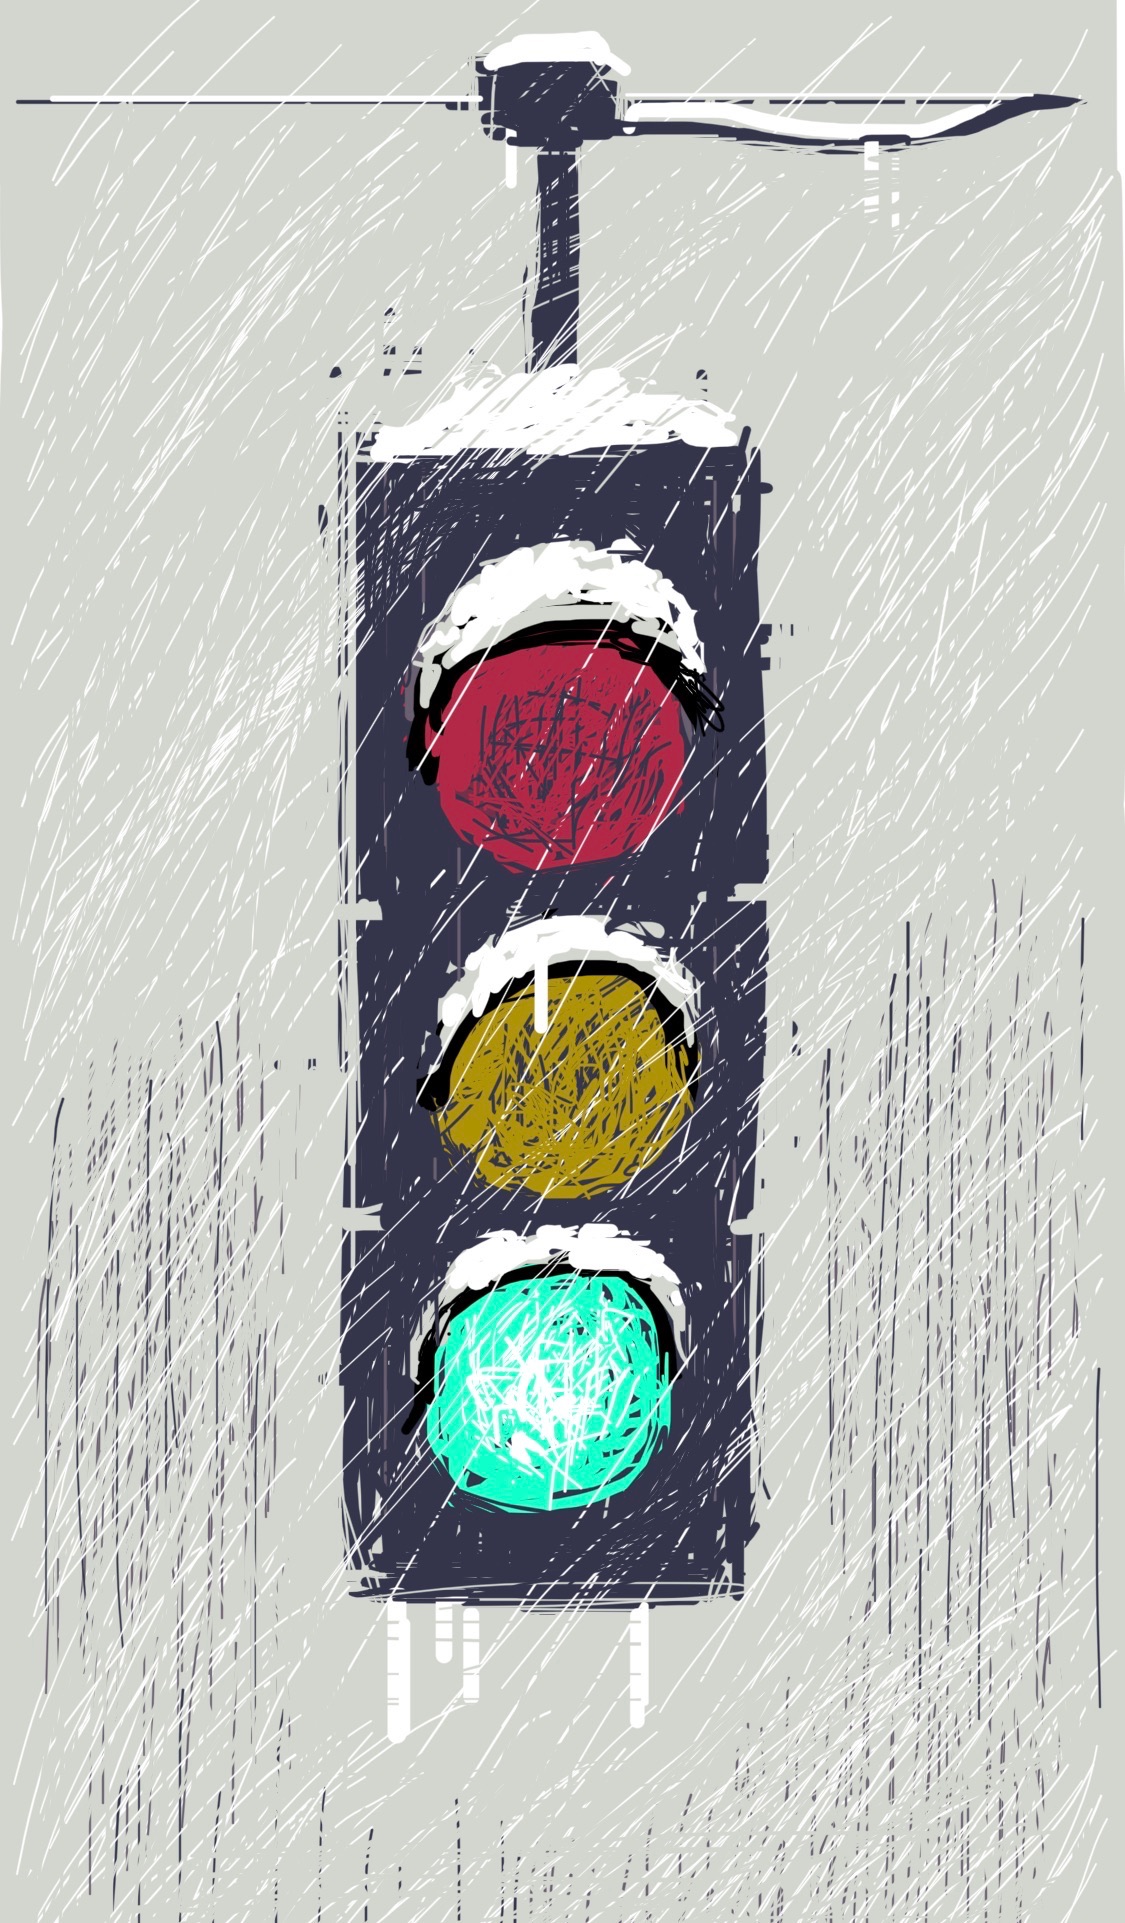 A traffic light in a sleetstorm, covered with snow